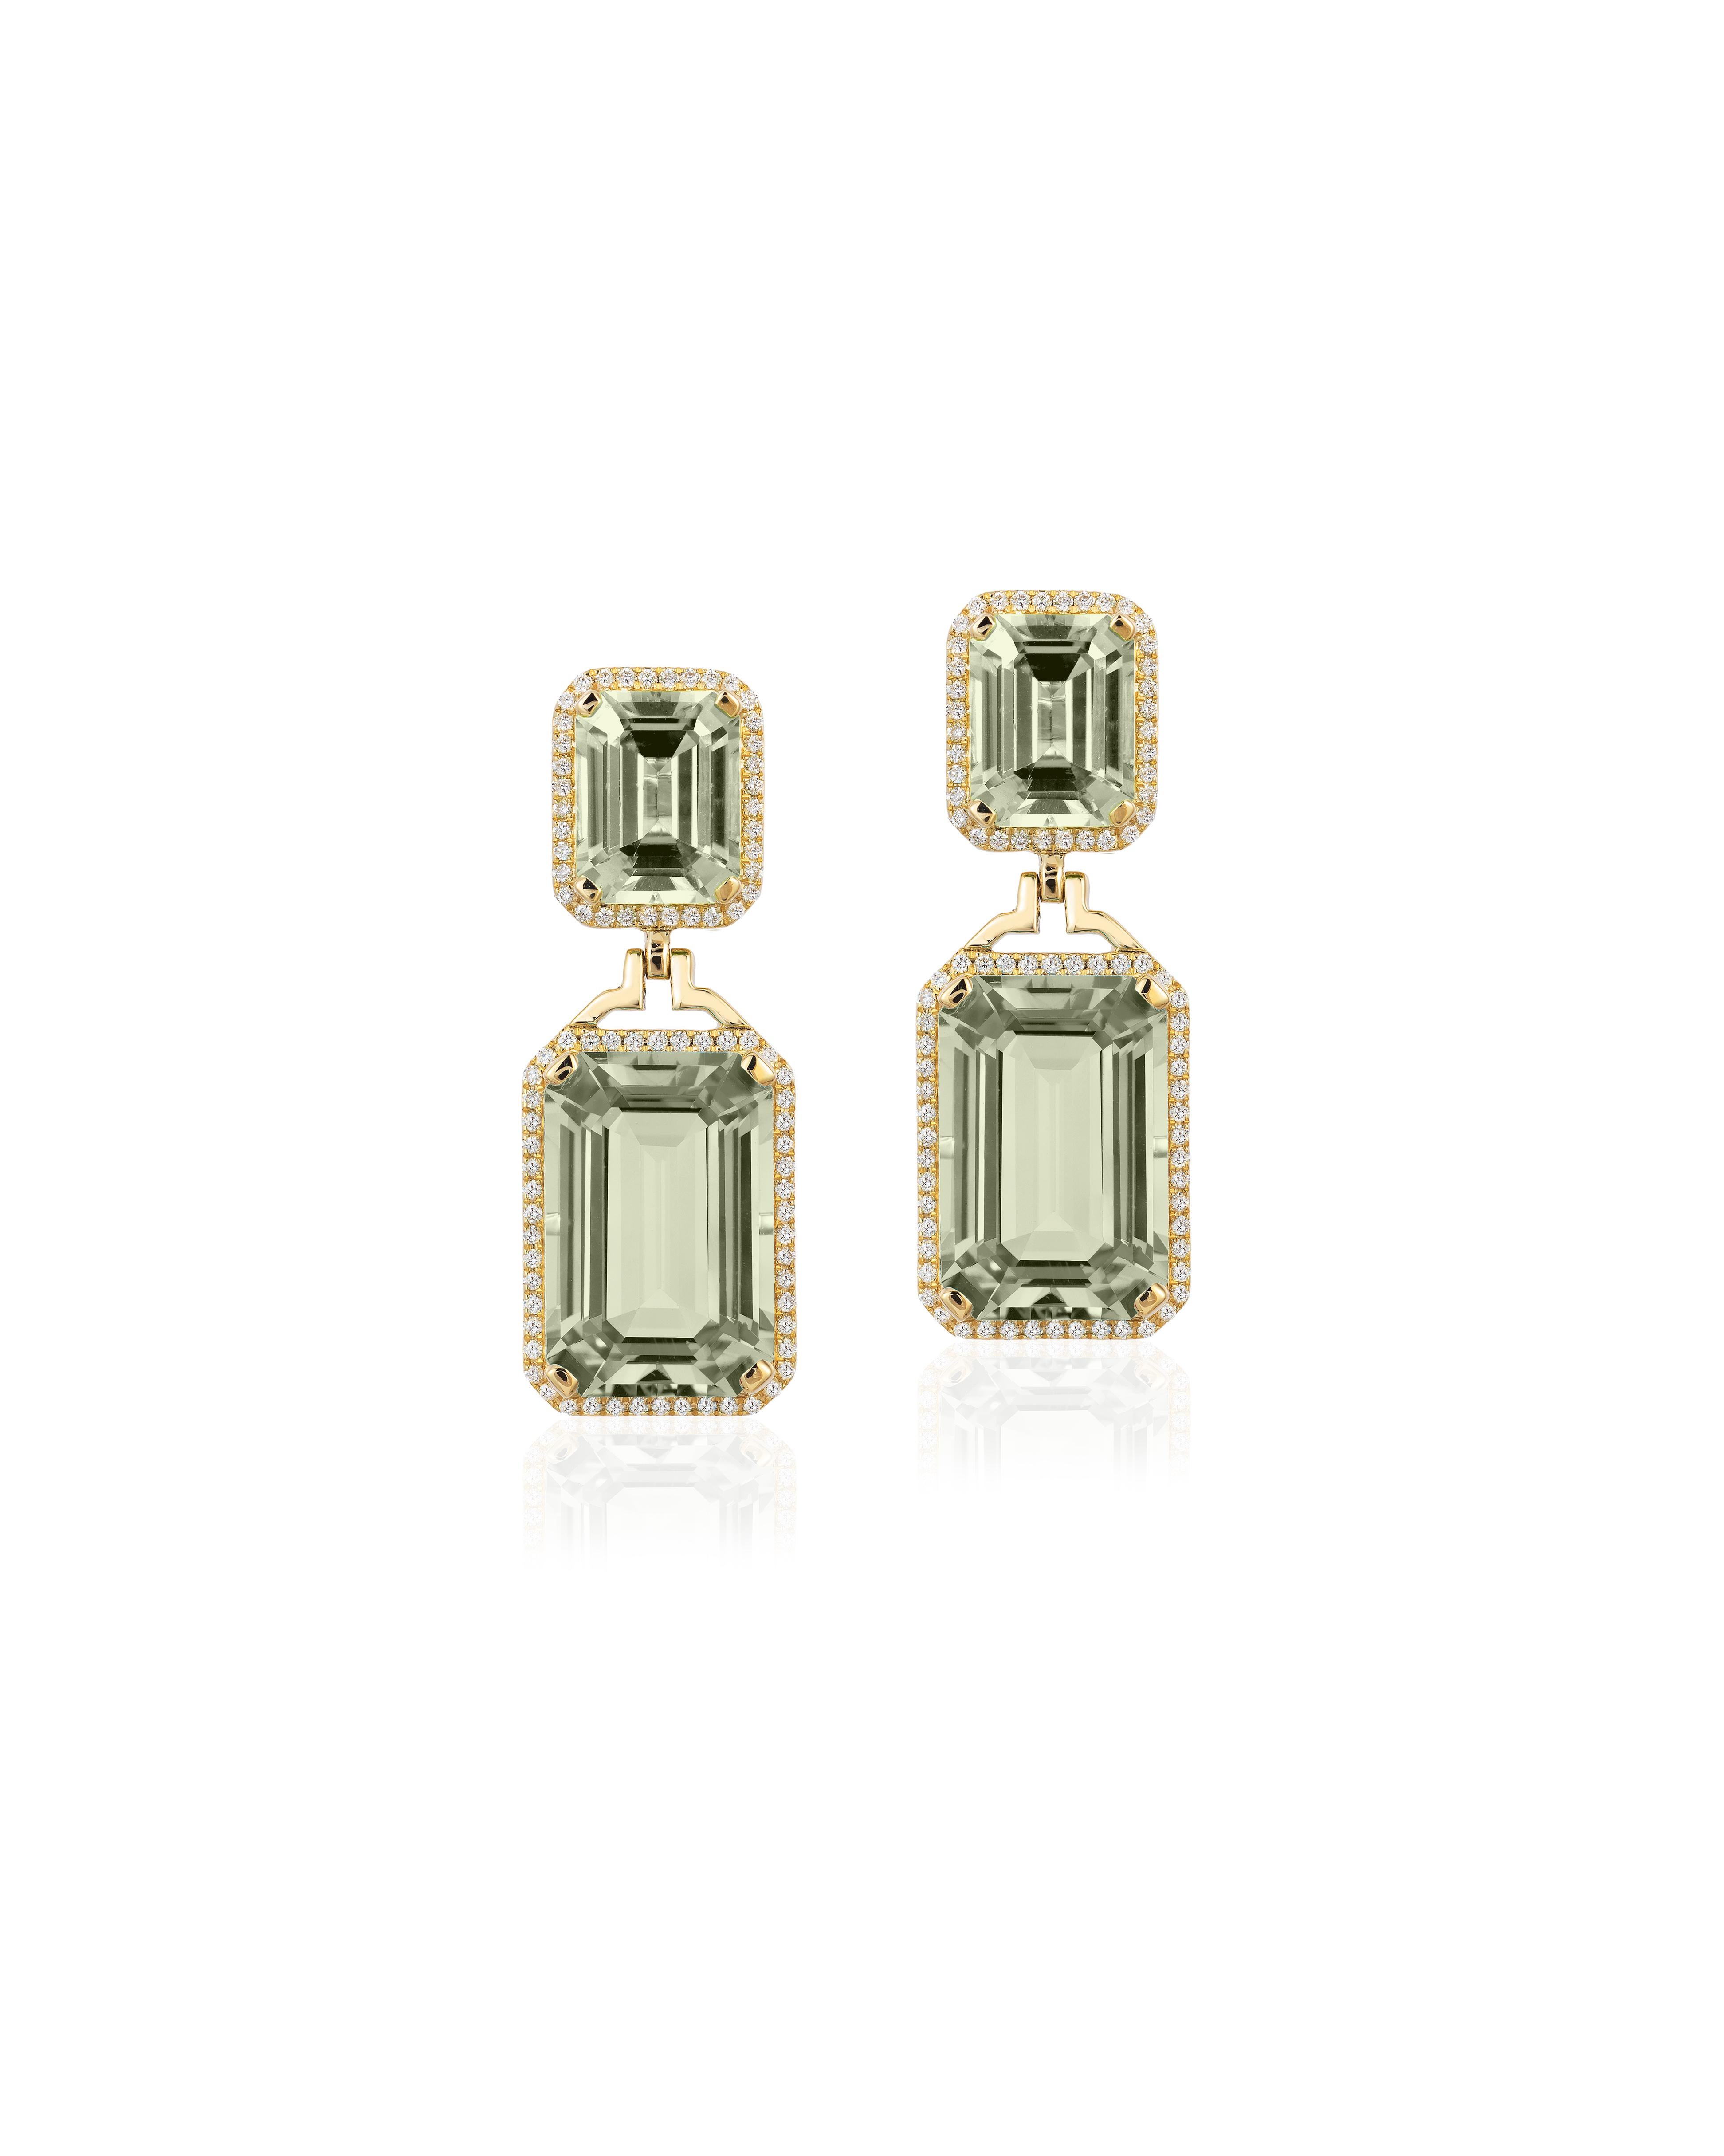 Prasiolite Emerald Cut Diamond Earrings in 18K Yellow Gold, from 'Gossip' Collection. Like any good piece of gossip, this collection carries a hint of shock value. They will have everyone in suspense about what Goshwara will do next.

* Gemstone